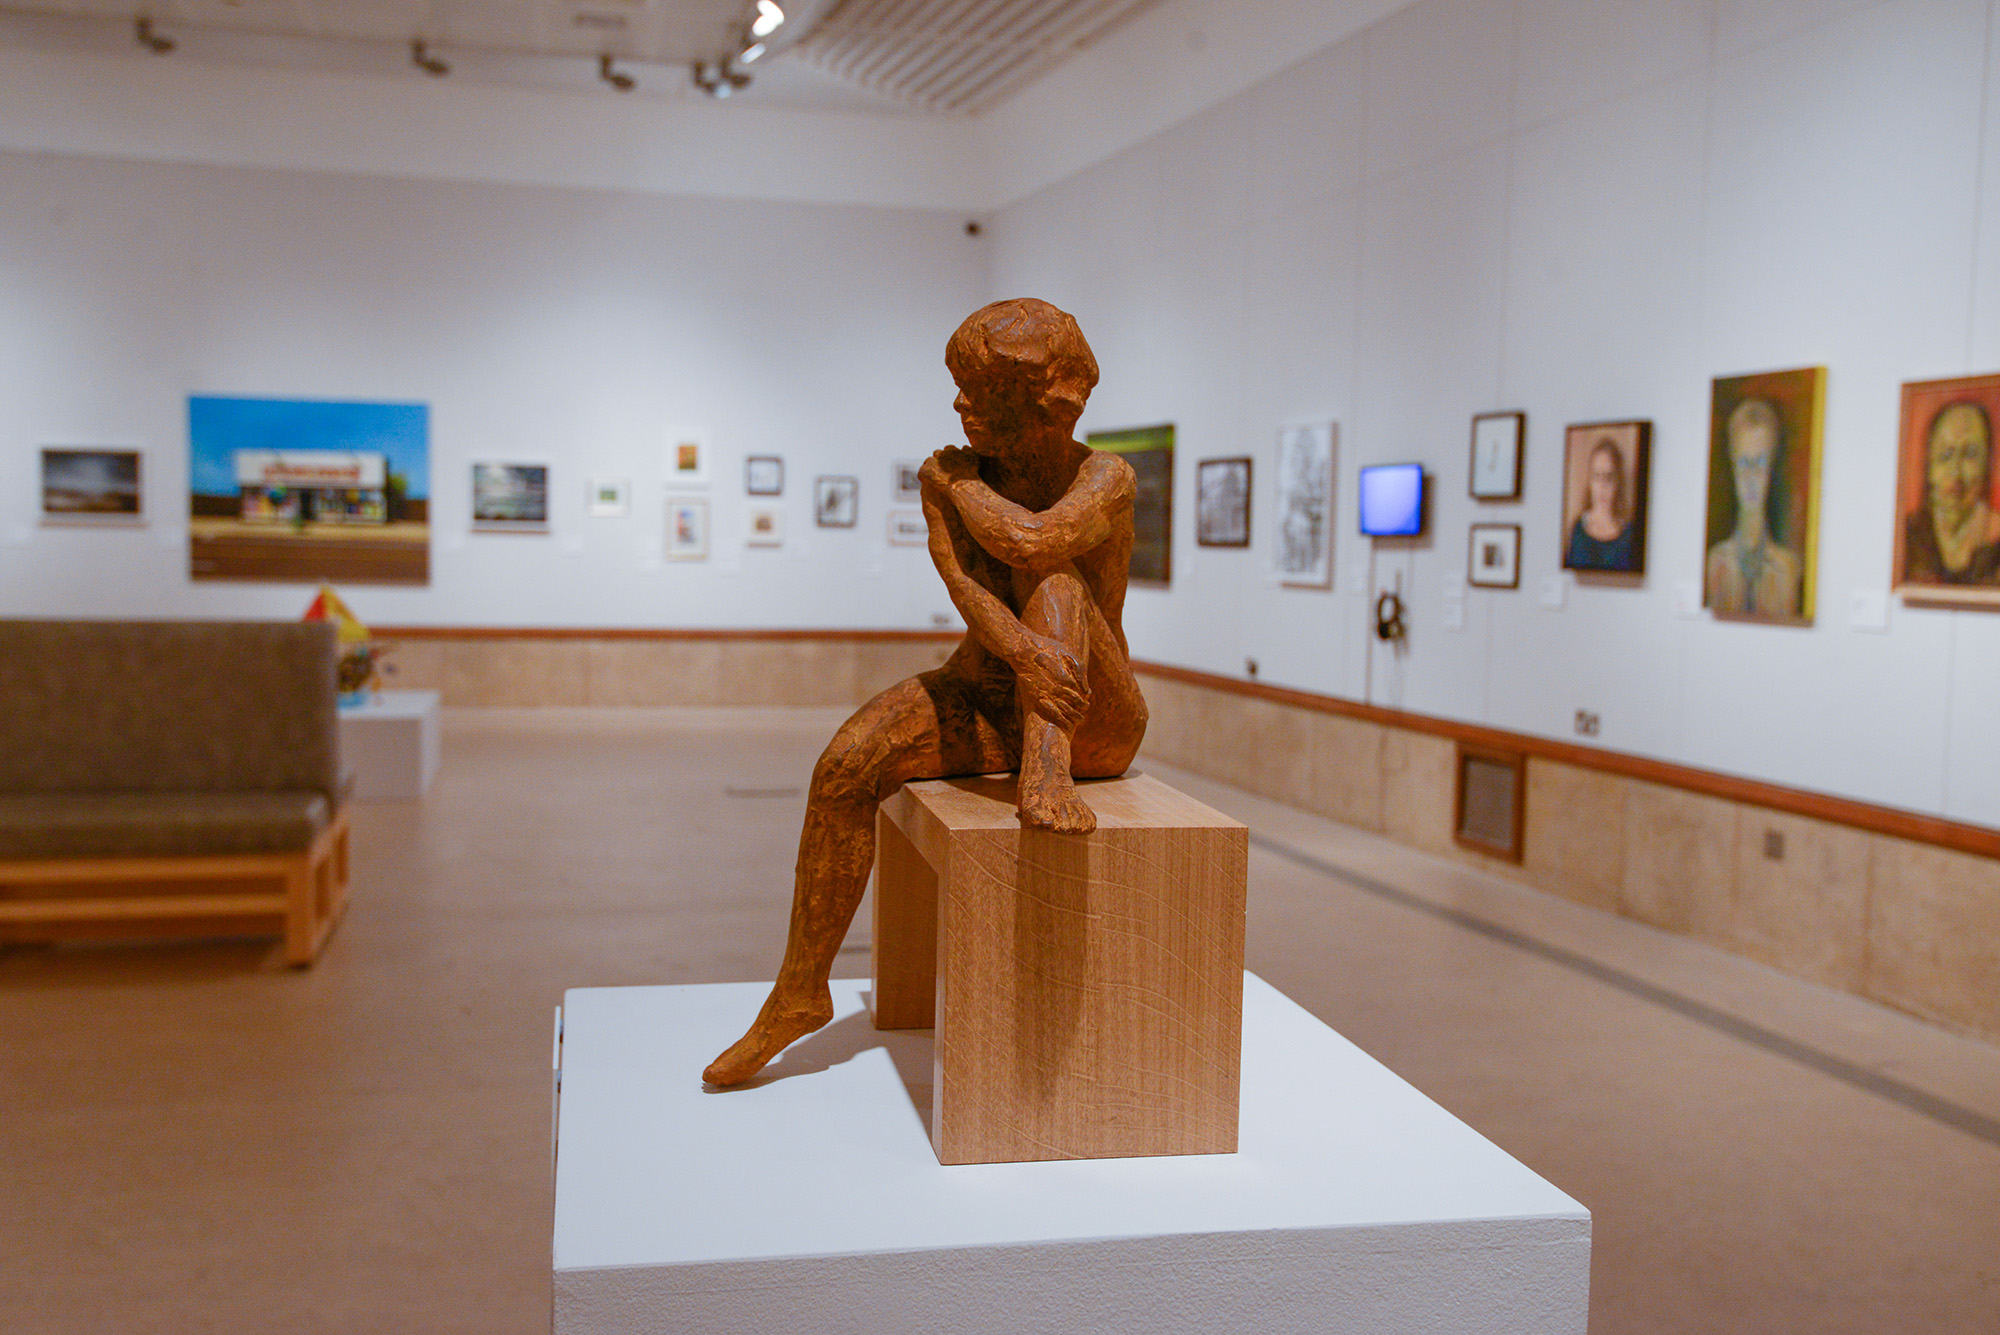 A photo from the Coventry Open 2020 exhibition showing a small figure sculpture on a plinth, surrounded by paintings and drawings hanging on white walls